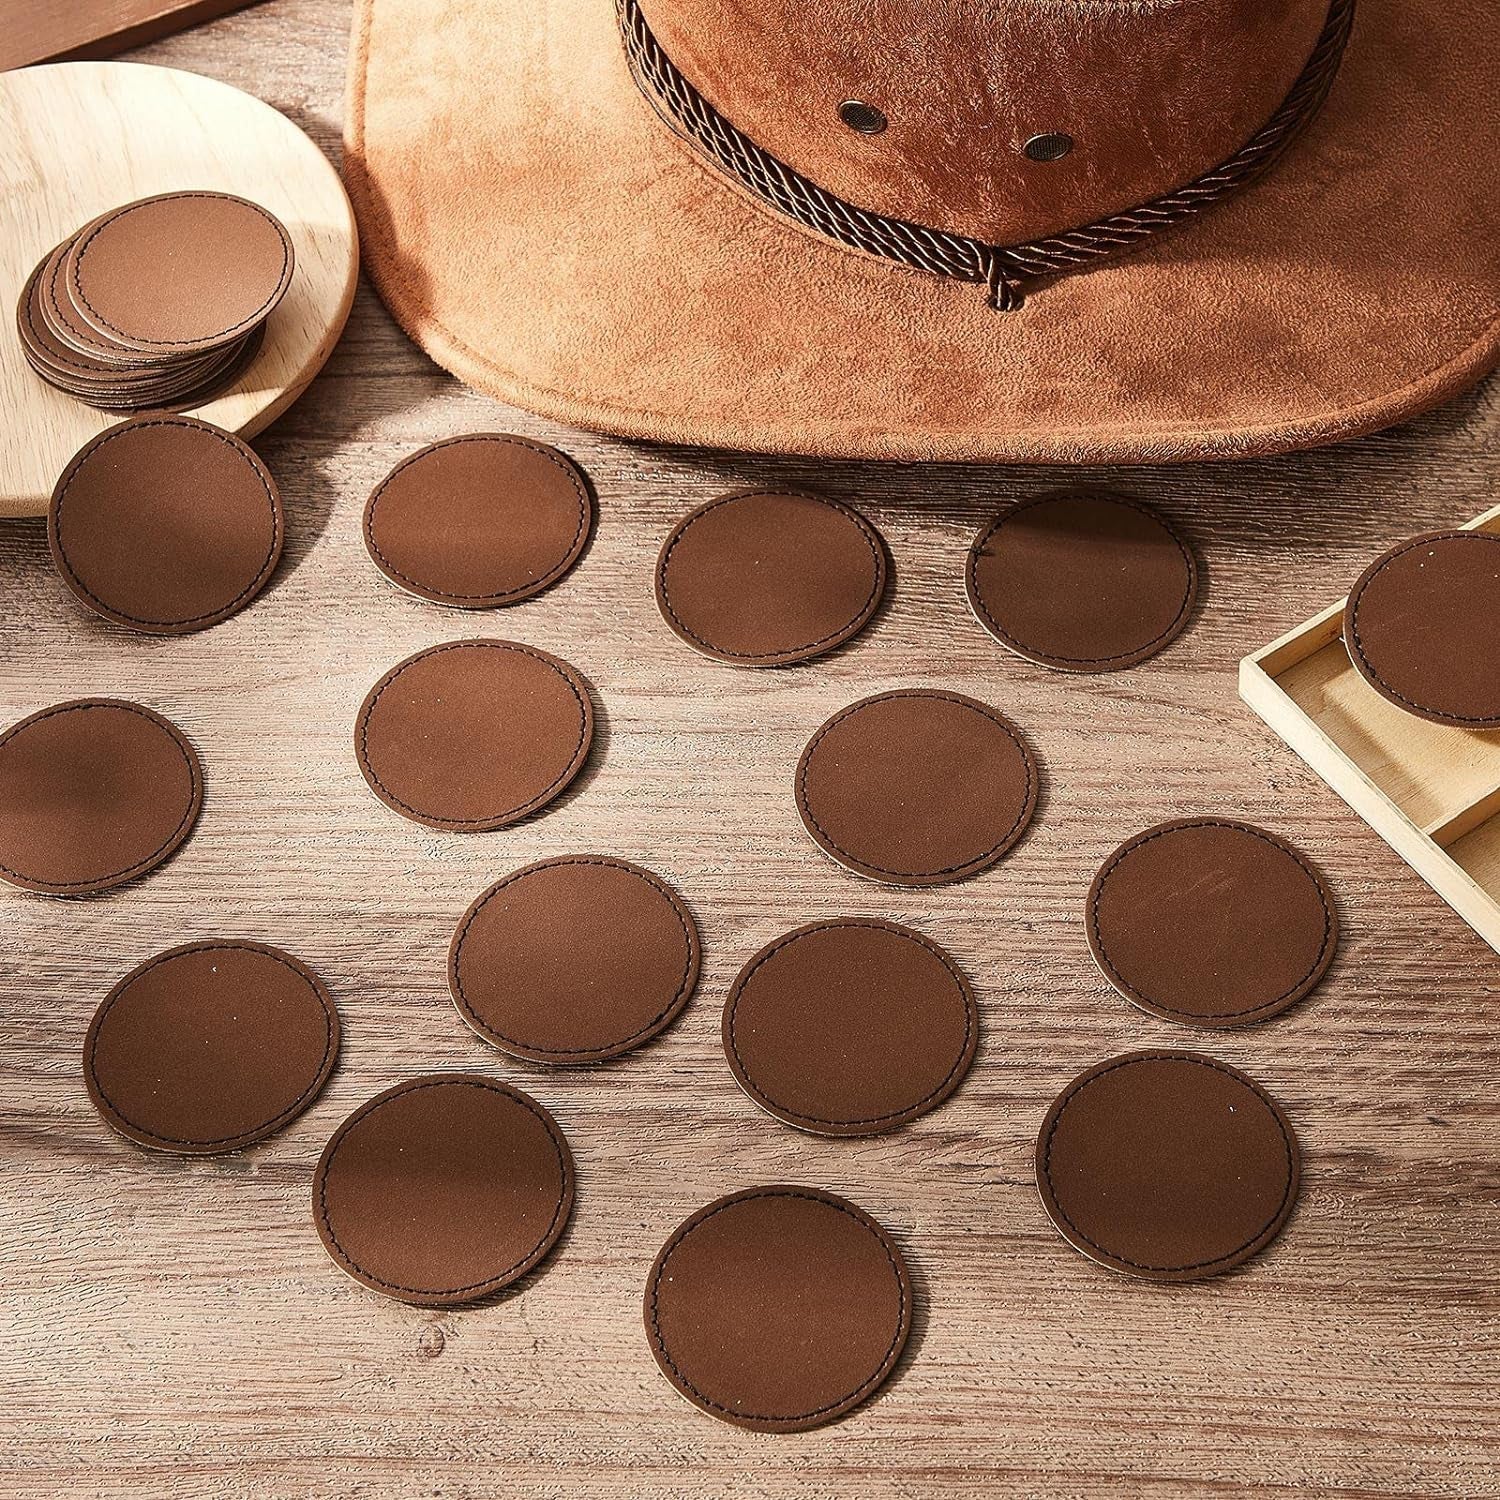 30 Pcs Blank Leather Hat Patches with Adhesive round Laserable Leatherette Patch Brown Faux Leather Patches Glowforge Laser Supplies for Hats, Jackets, Backpacks (Dark Brown)